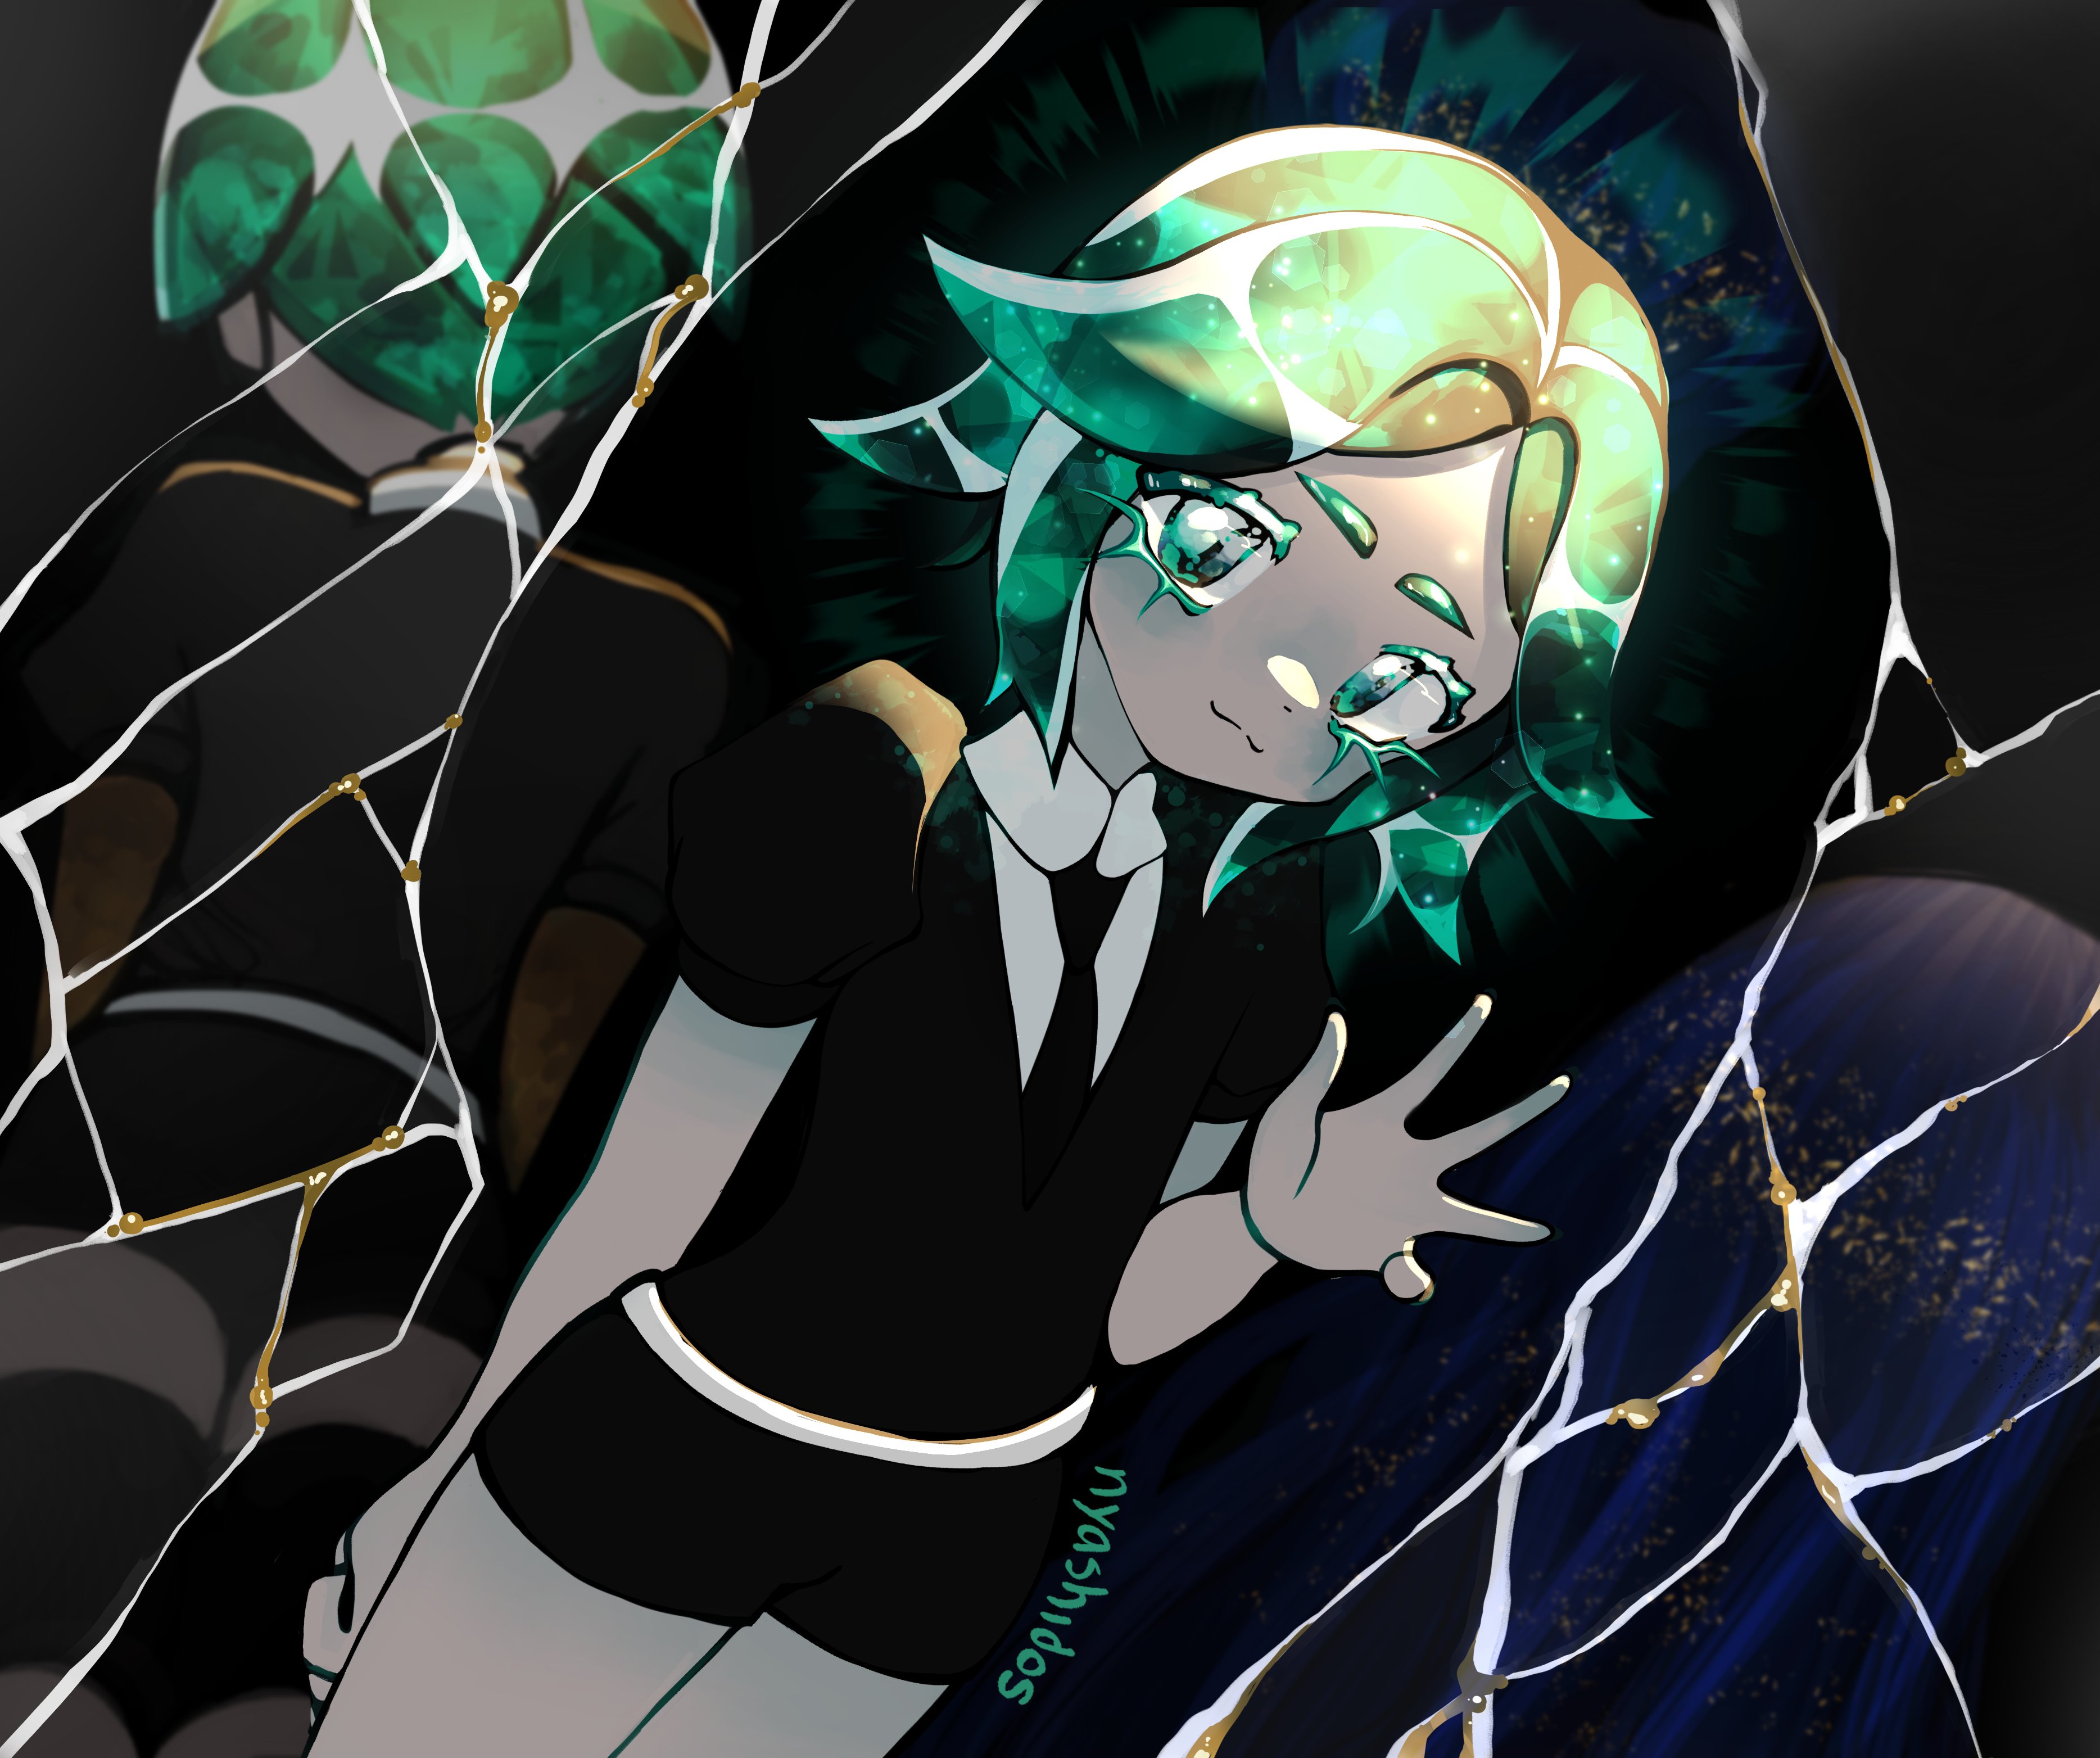 phosphophylite from land of the lustrous!